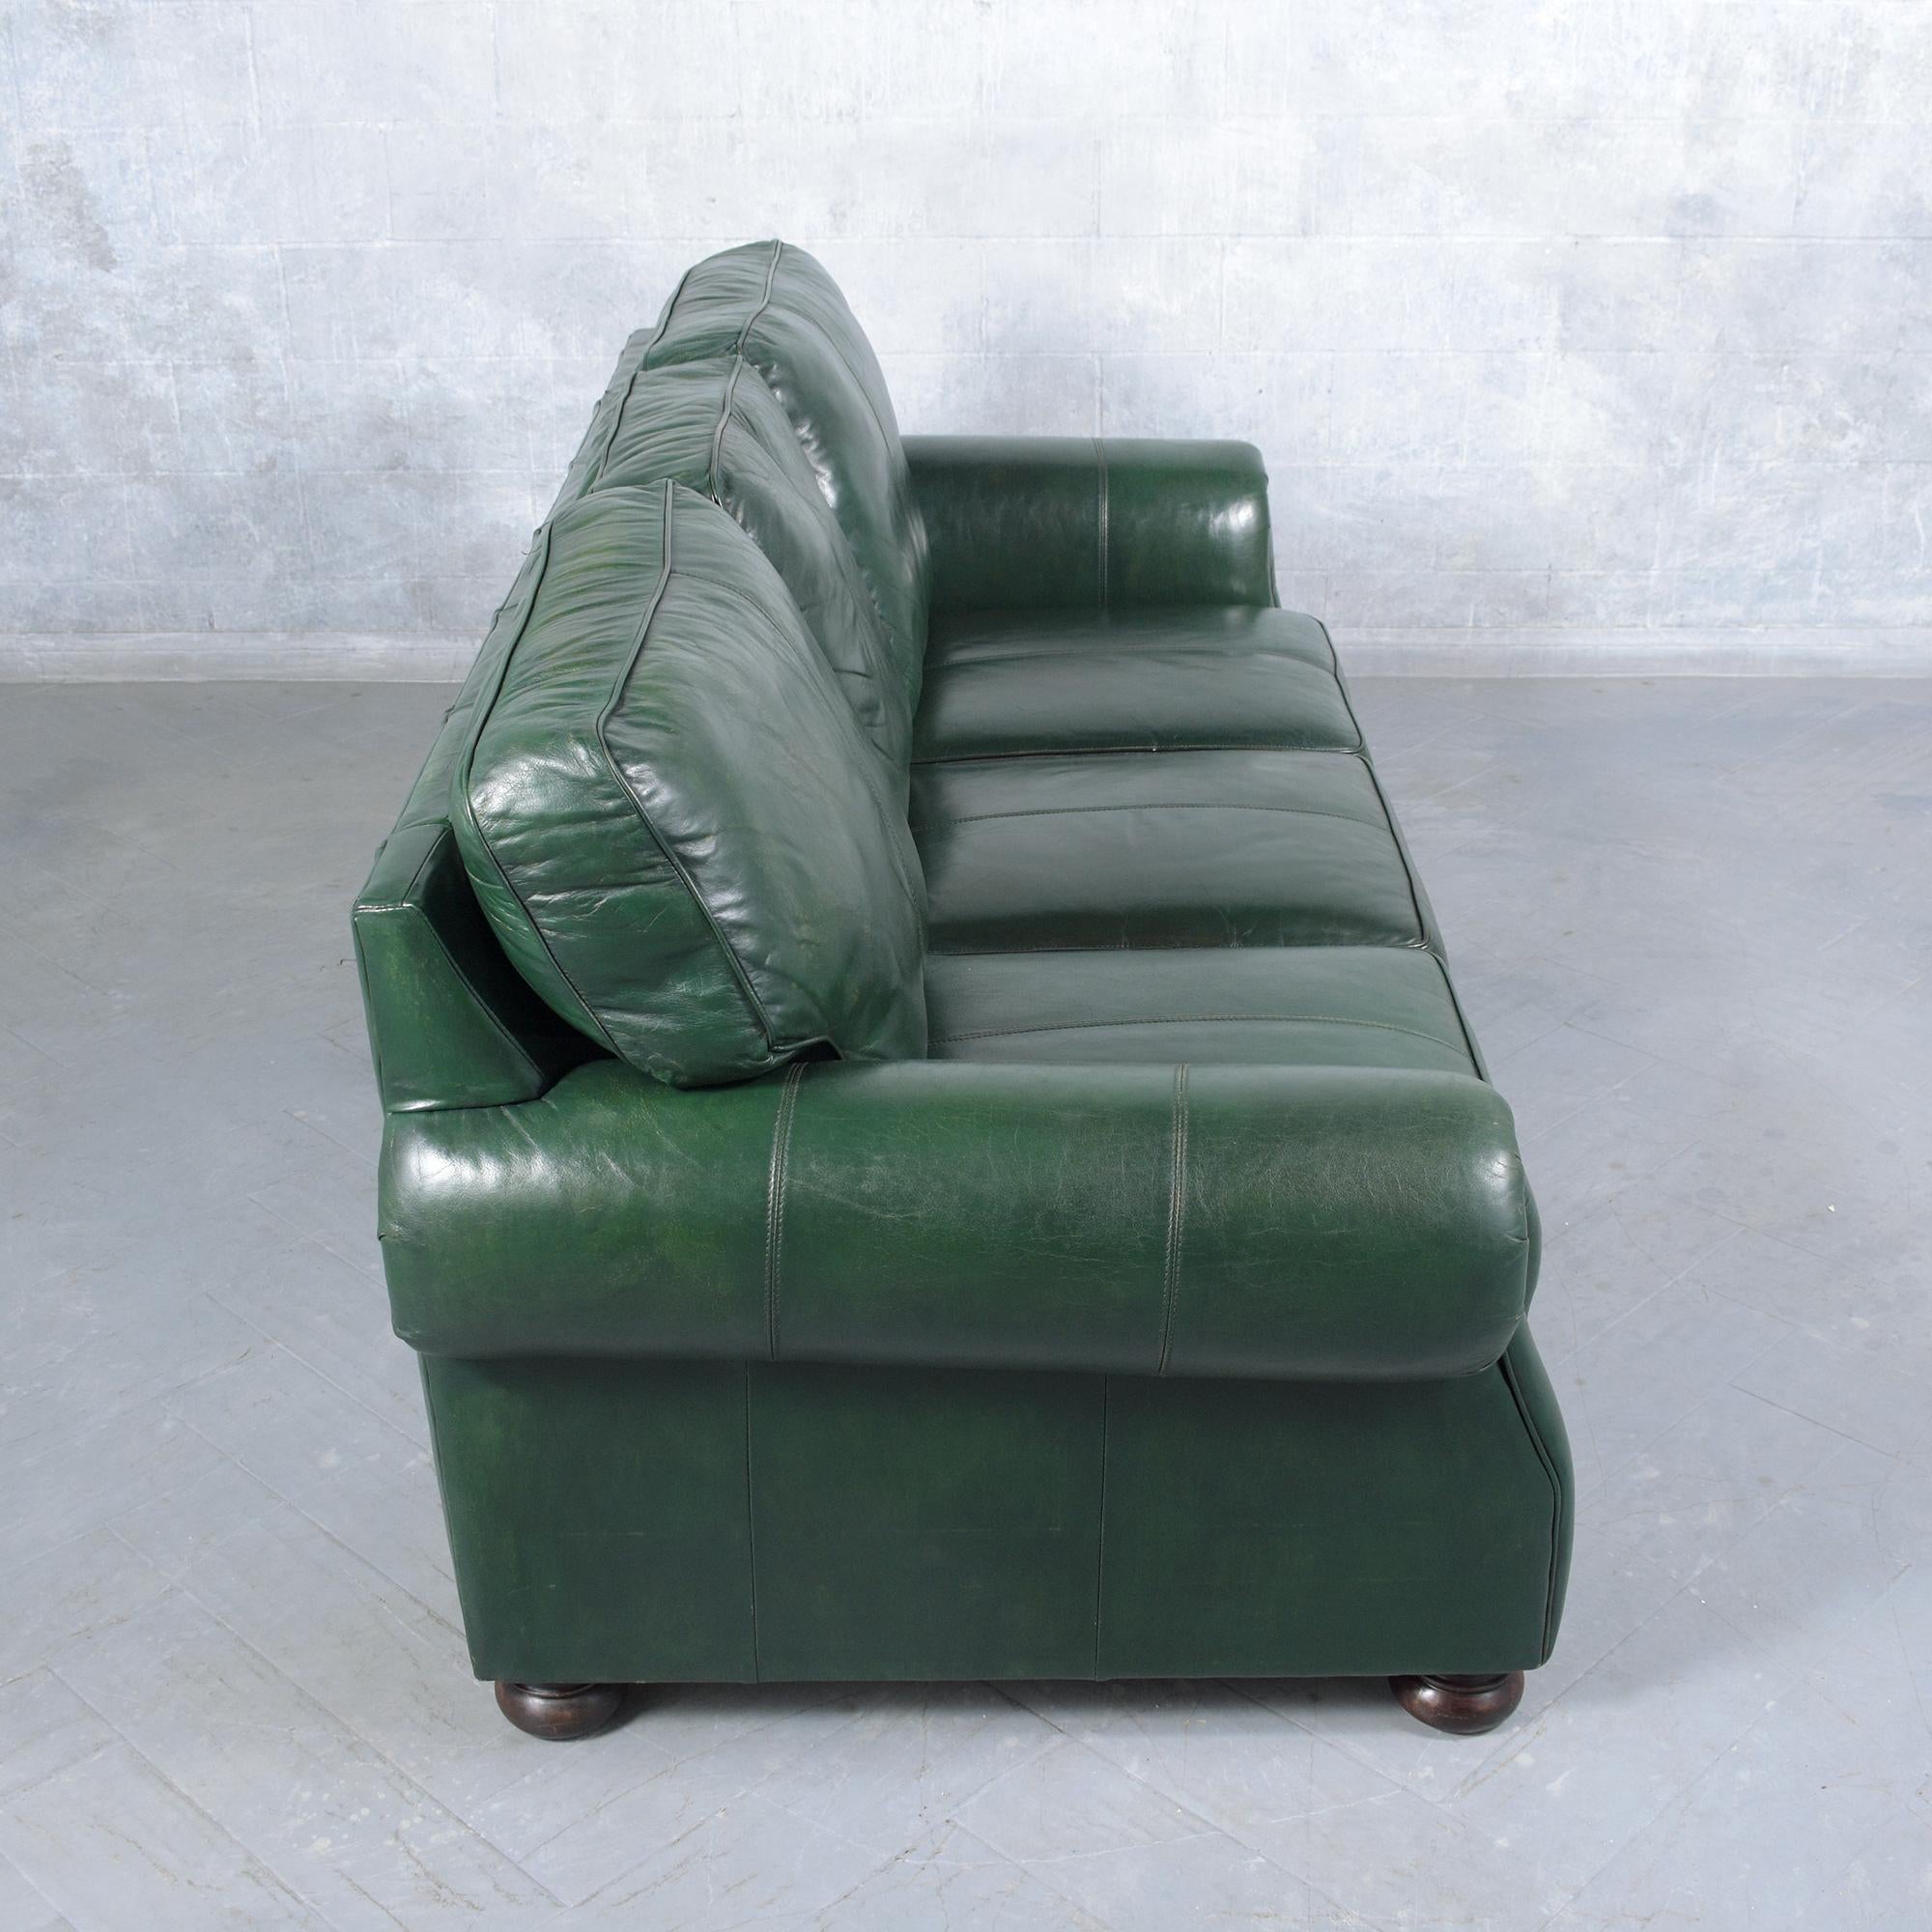 Restored 1980s Vintage Leather Sofa in Dark Green with Carved Bun Legs For Sale 5